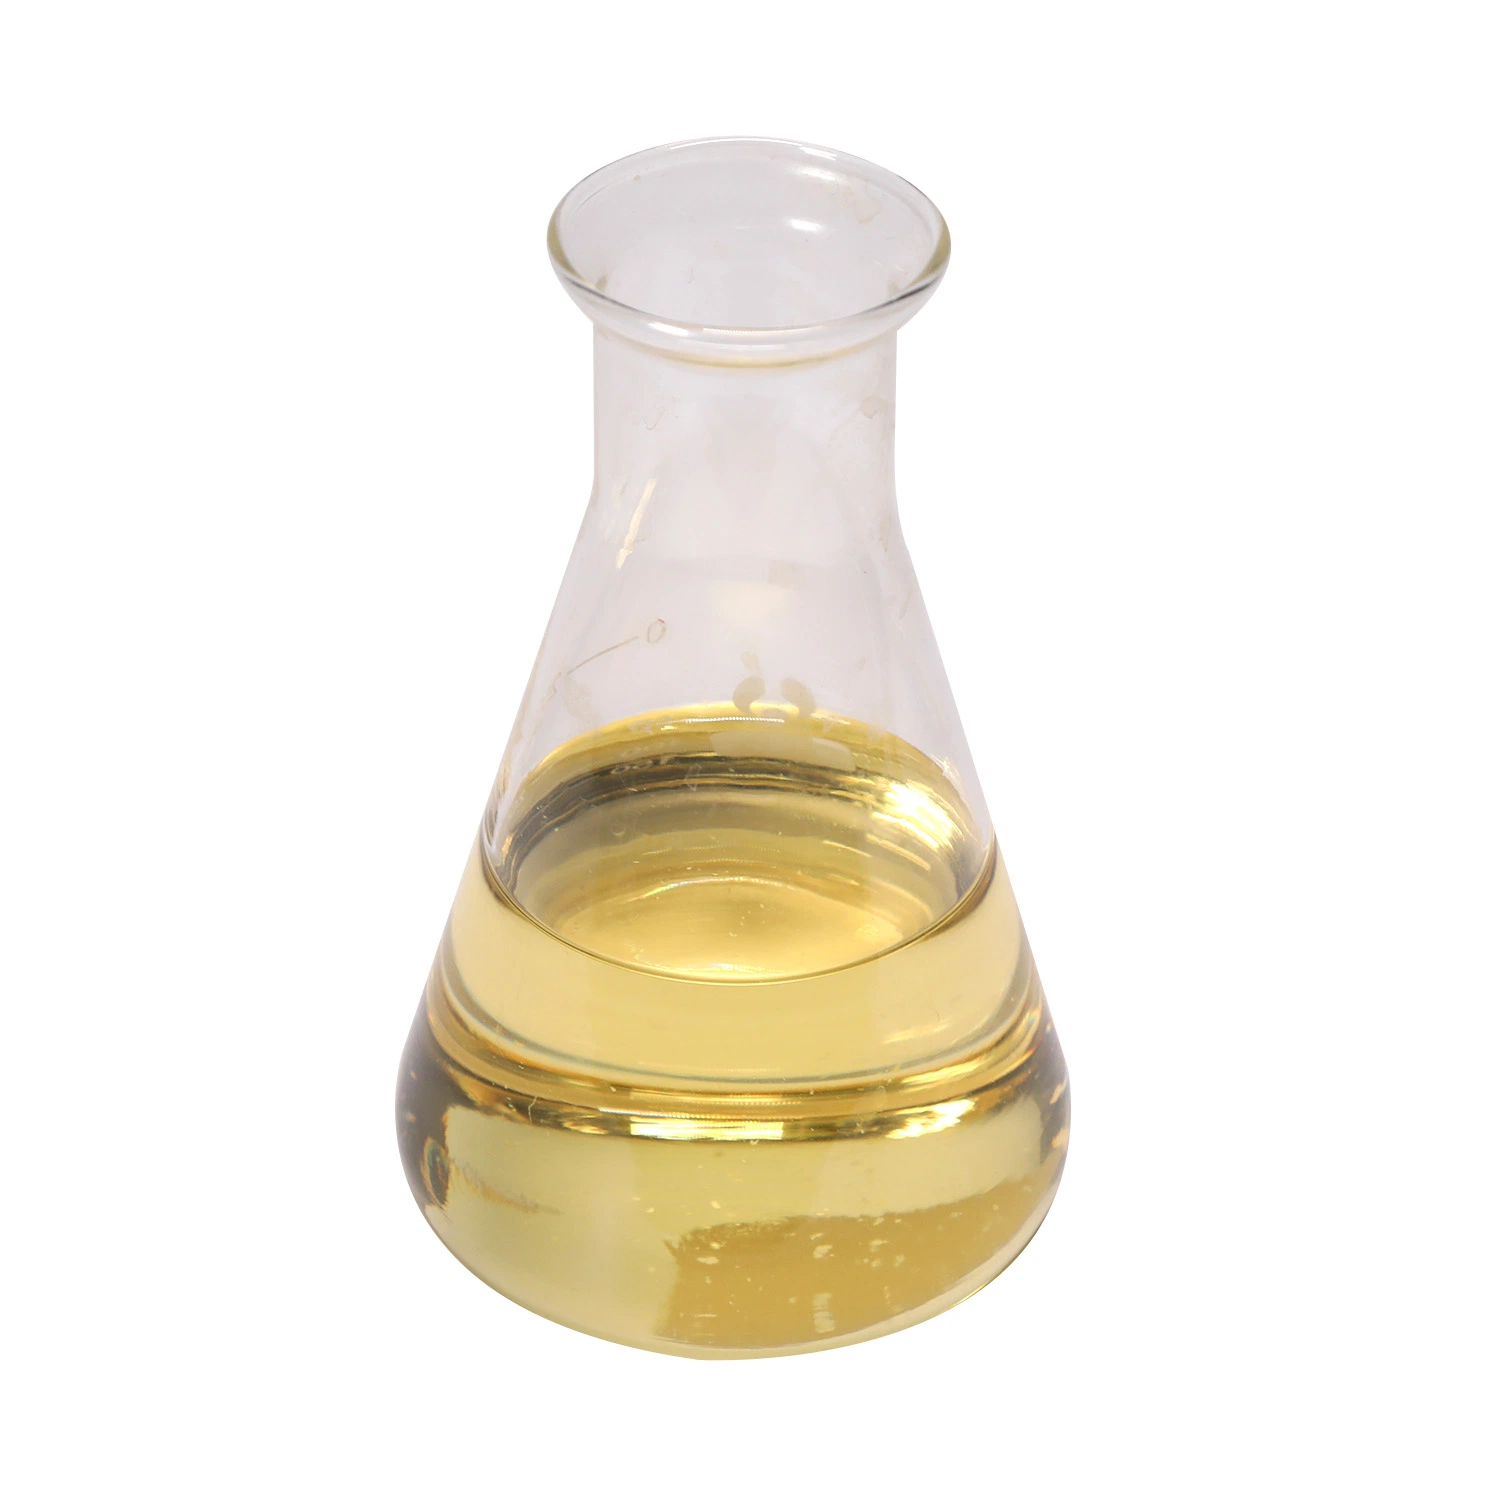 Organic Intermediate Raw Material O-Toluidinev CAS 95-53-4 for Selling with Best Price